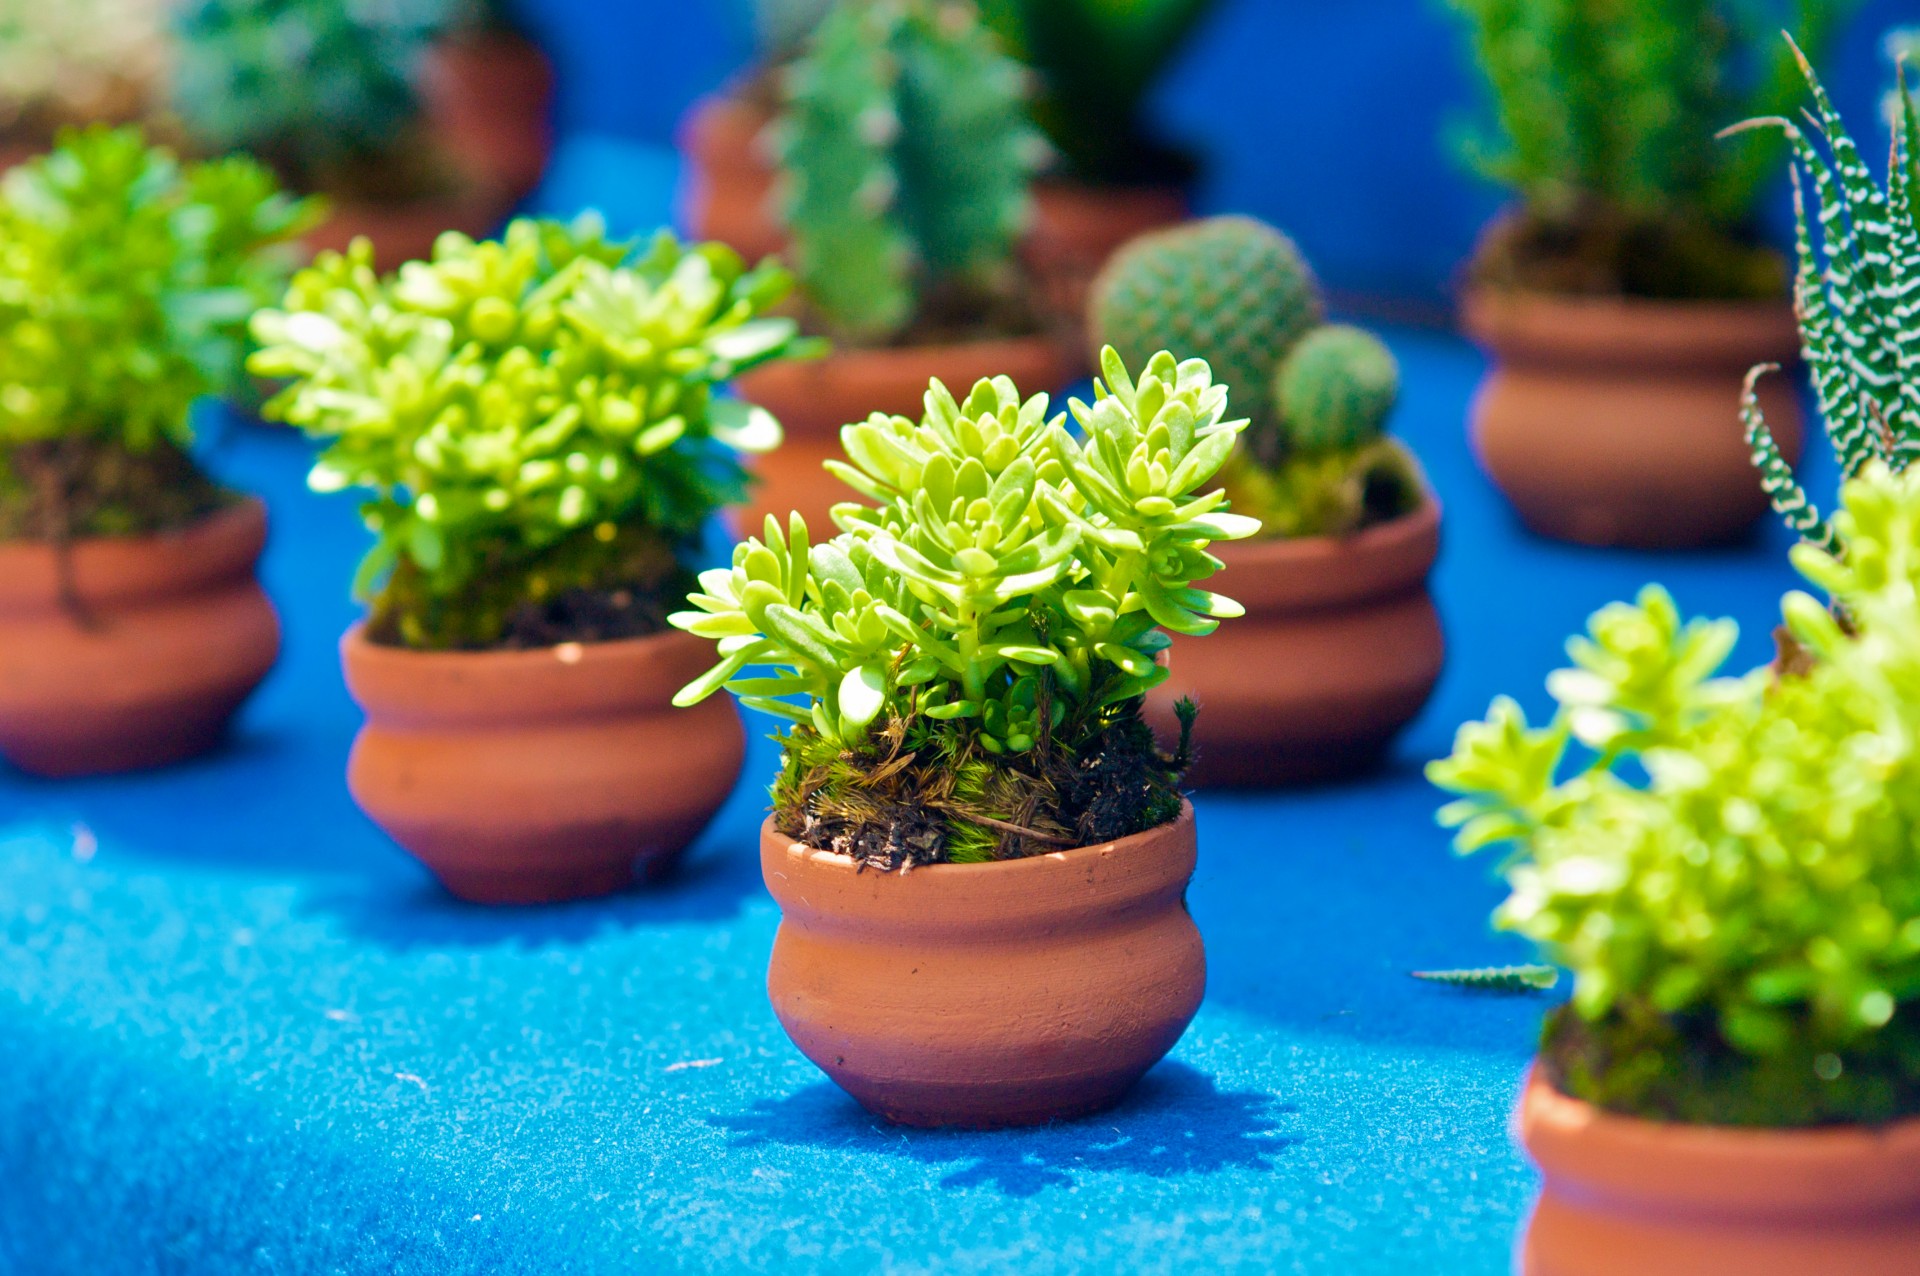 Little Green Plants For Sale Free Stock Photo - Public Domain Pictures